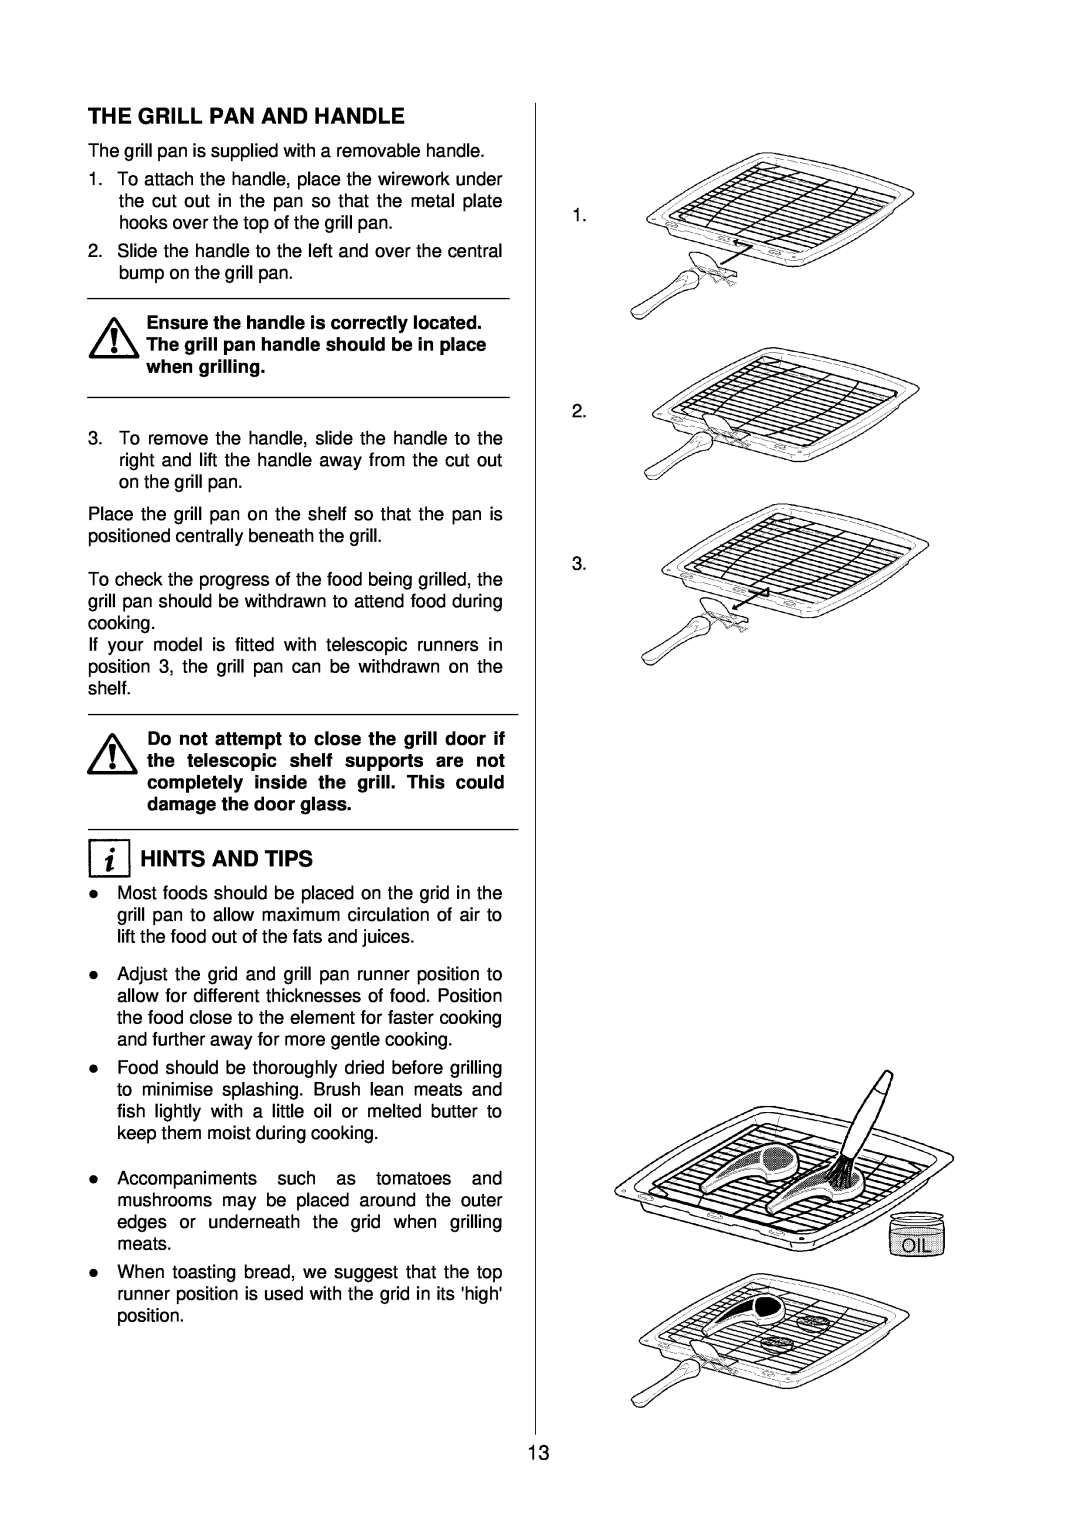 Electrolux D4100-1 operating instructions The Grill Pan And Handle, Hints And Tips 